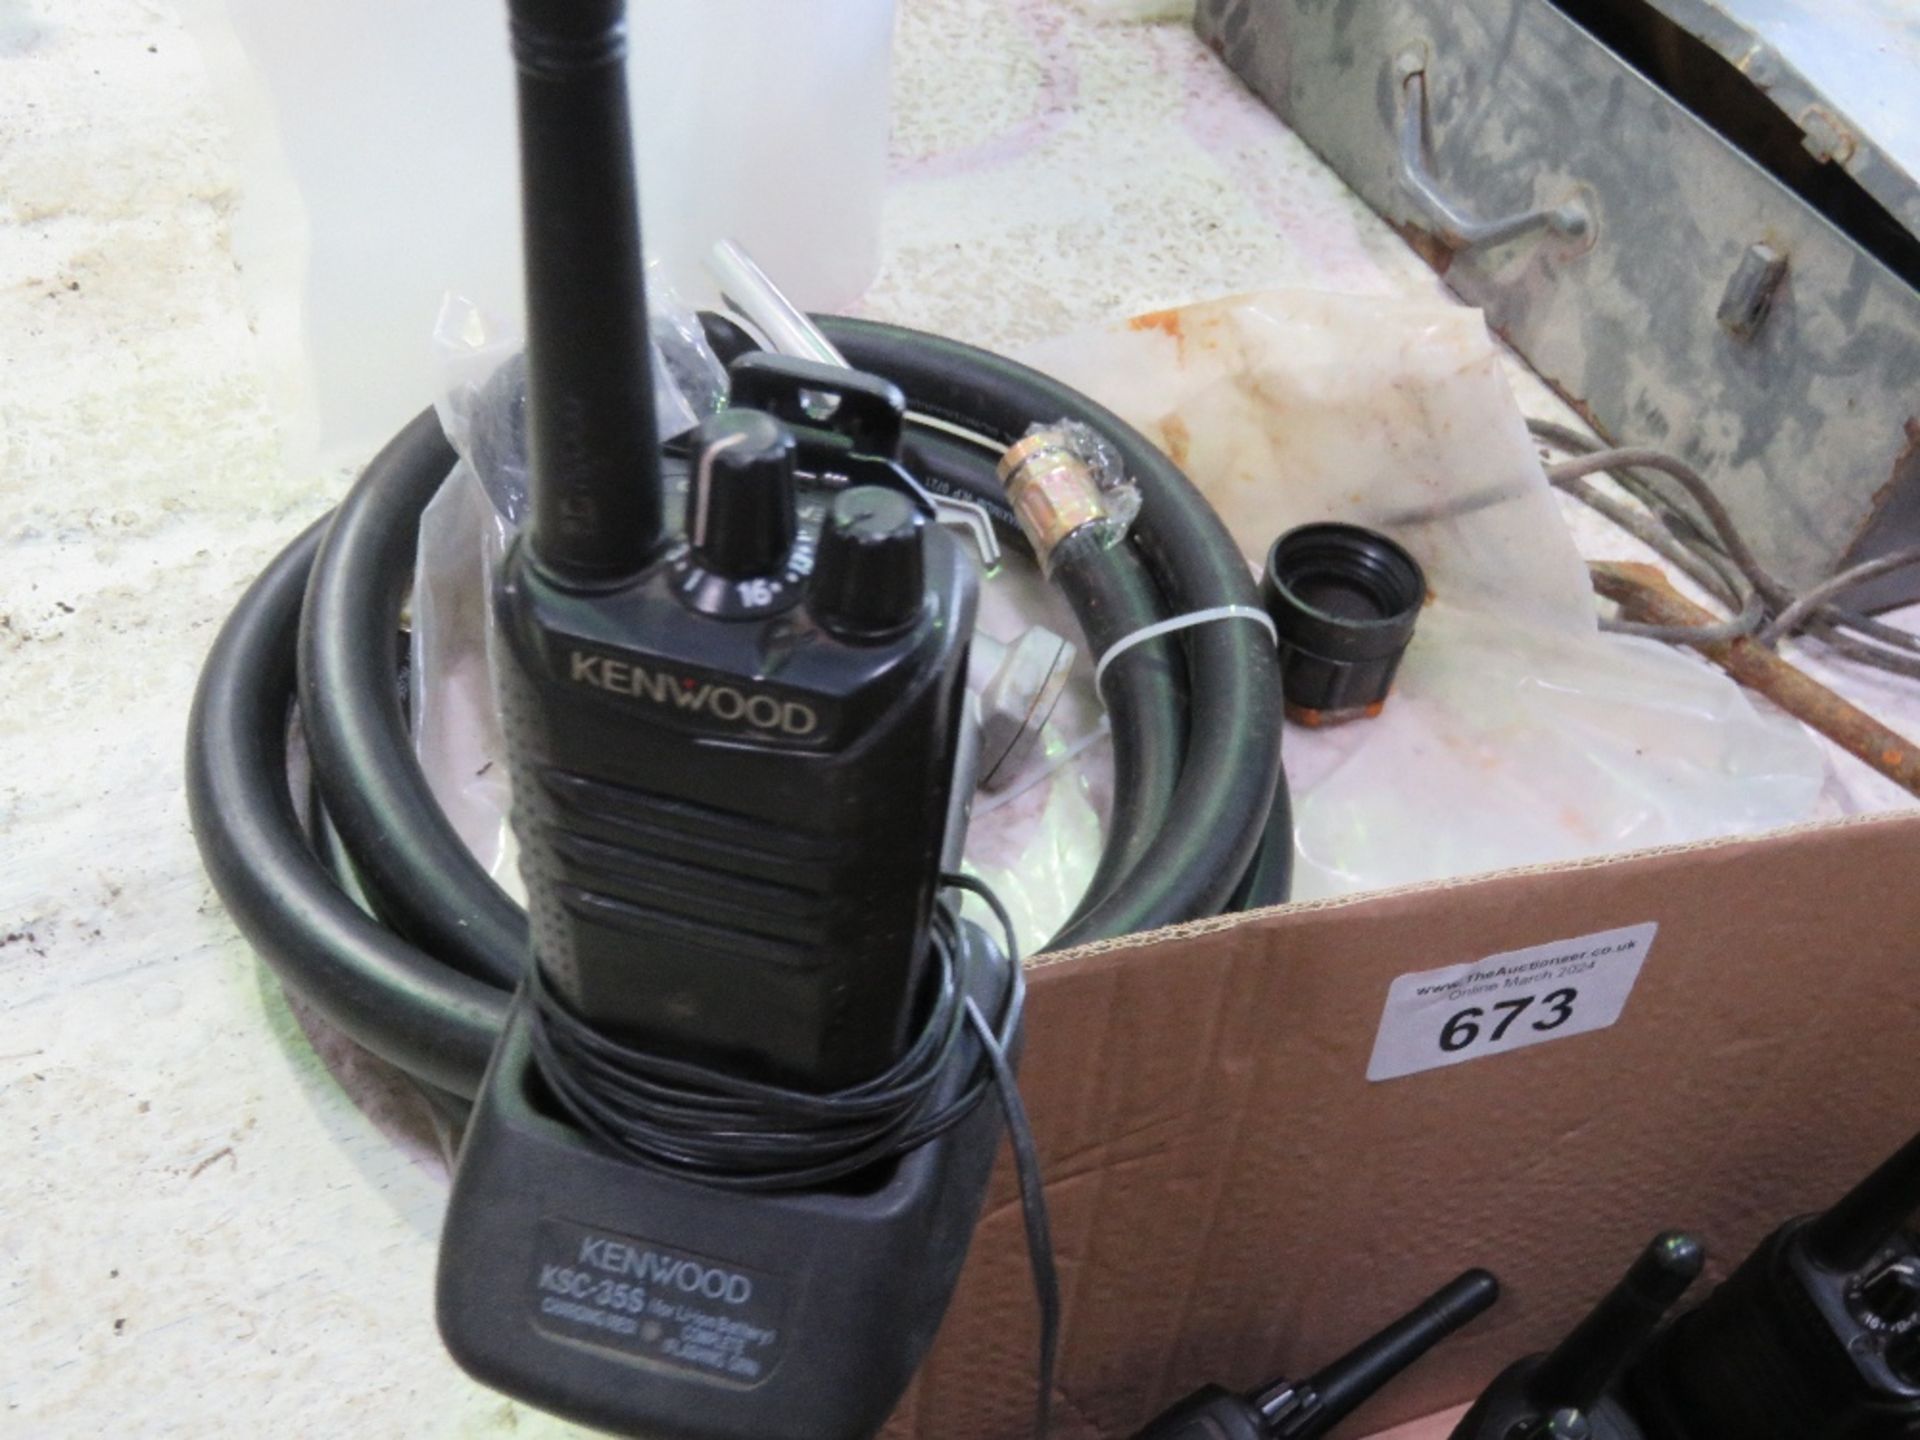 9NO KENWOOD WALKIE TALKIE RADIOS WITH CHARGERS. DIRECT FROM SITE CLOSURE. WORKING WHEN REMOVED. T - Image 2 of 4